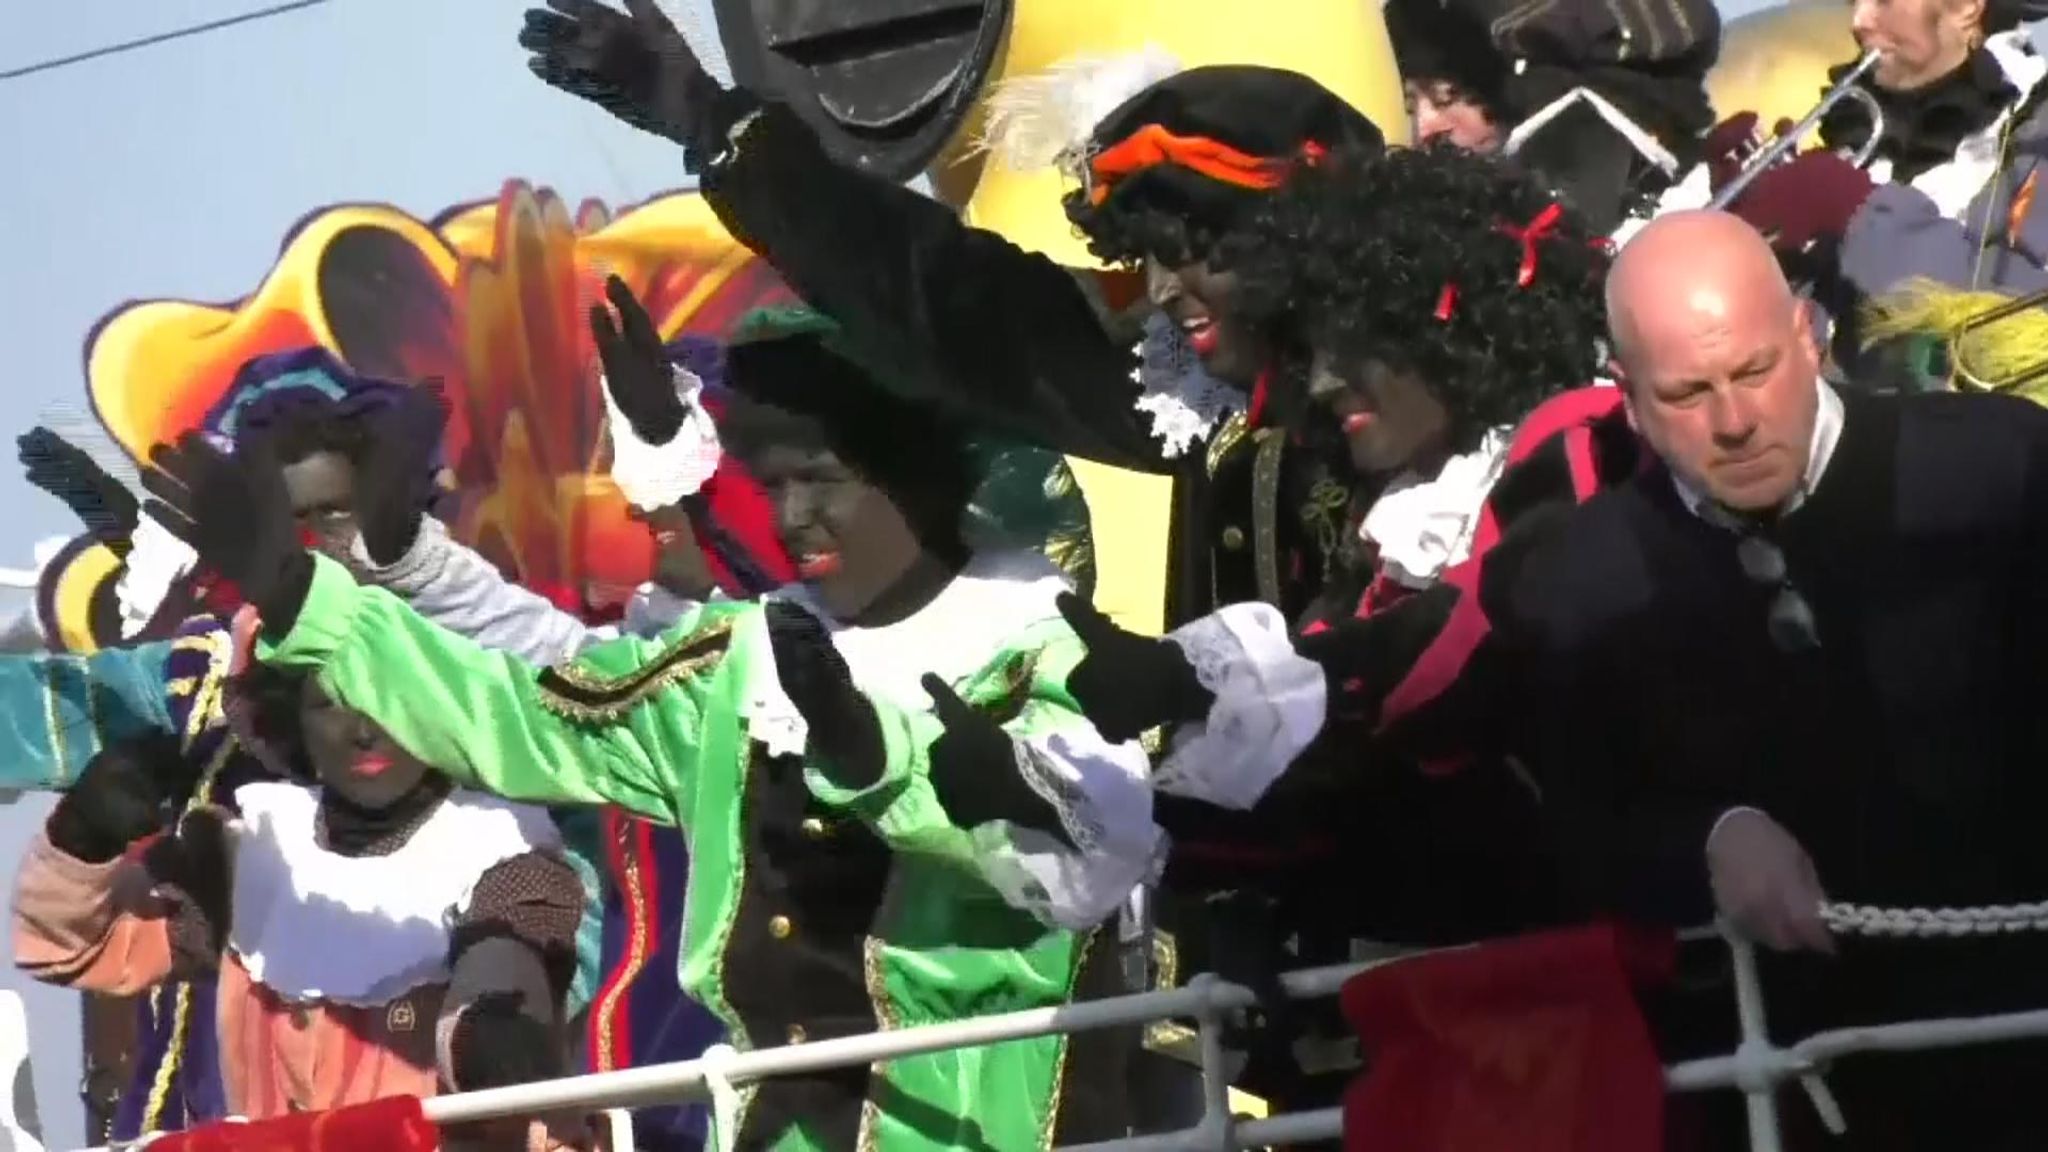 'Black Pete' character sparks clashes in the Netherlands World News